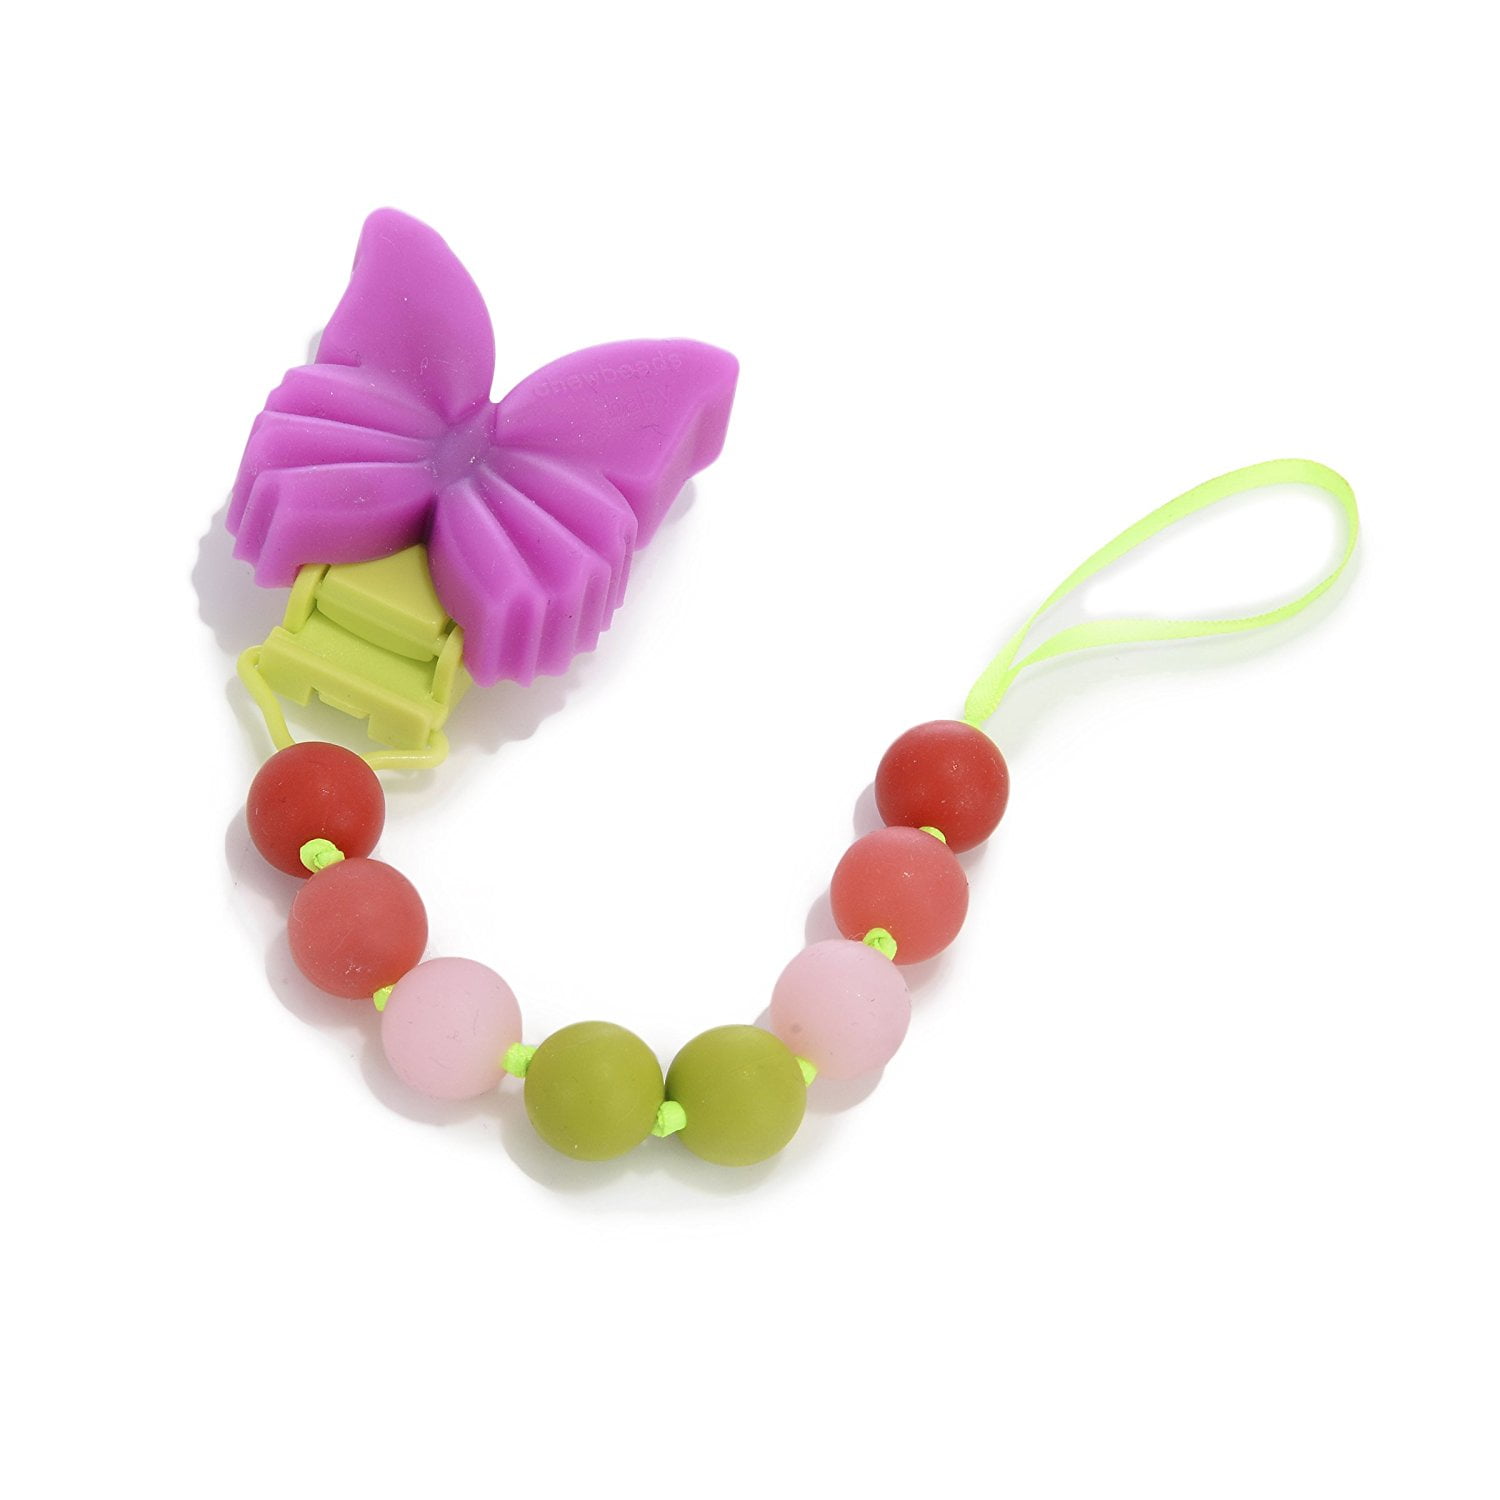 100% Safe Silicone CB GO By Chewbeads &39Where&39s The Pacifier" Clip 